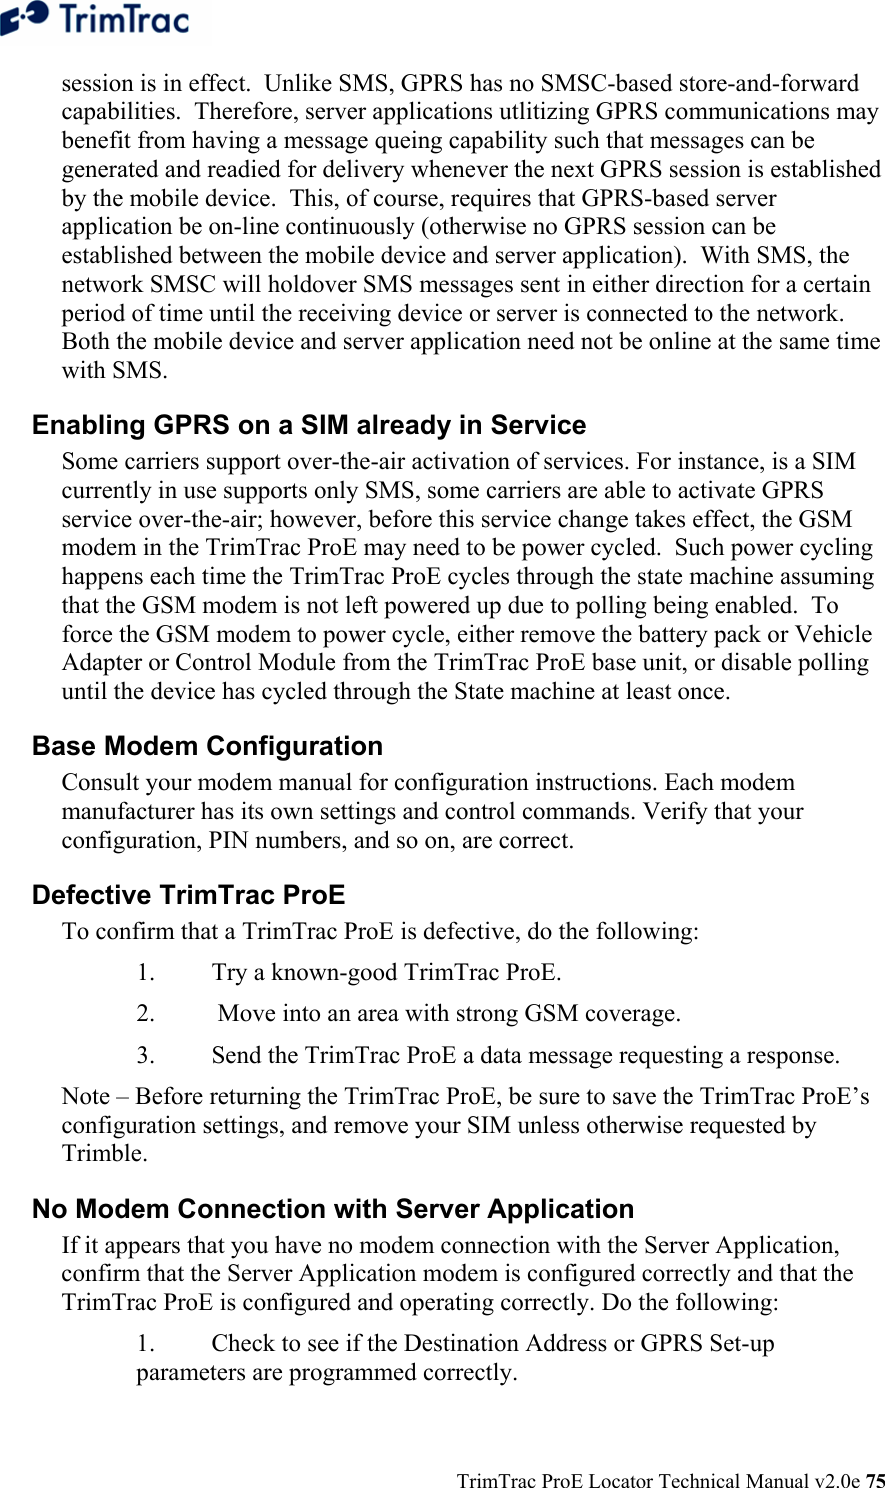  TrimTrac ProE Locator Technical Manual v2.0e 75 session is in effect.  Unlike SMS, GPRS has no SMSC-based store-and-forward capabilities.  Therefore, server applications utlitizing GPRS communications may benefit from having a message queing capability such that messages can be generated and readied for delivery whenever the next GPRS session is established by the mobile device.  This, of course, requires that GPRS-based server application be on-line continuously (otherwise no GPRS session can be established between the mobile device and server application).  With SMS, the network SMSC will holdover SMS messages sent in either direction for a certain period of time until the receiving device or server is connected to the network.  Both the mobile device and server application need not be online at the same time with SMS. Enabling GPRS on a SIM already in Service  Some carriers support over-the-air activation of services. For instance, is a SIM currently in use supports only SMS, some carriers are able to activate GPRS service over-the-air; however, before this service change takes effect, the GSM modem in the TrimTrac ProE may need to be power cycled.  Such power cycling happens each time the TrimTrac ProE cycles through the state machine assuming that the GSM modem is not left powered up due to polling being enabled.  To force the GSM modem to power cycle, either remove the battery pack or Vehicle Adapter or Control Module from the TrimTrac ProE base unit, or disable polling until the device has cycled through the State machine at least once. Base Modem Configuration  Consult your modem manual for configuration instructions. Each modem manufacturer has its own settings and control commands. Verify that your configuration, PIN numbers, and so on, are correct. Defective TrimTrac ProE  To confirm that a TrimTrac ProE is defective, do the following:  1.  Try a known-good TrimTrac ProE. 2.   Move into an area with strong GSM coverage. 3.  Send the TrimTrac ProE a data message requesting a response.  Note – Before returning the TrimTrac ProE, be sure to save the TrimTrac ProE’s configuration settings, and remove your SIM unless otherwise requested by Trimble. No Modem Connection with Server Application  If it appears that you have no modem connection with the Server Application, confirm that the Server Application modem is configured correctly and that the TrimTrac ProE is configured and operating correctly. Do the following:  1.  Check to see if the Destination Address or GPRS Set-up parameters are programmed correctly. 